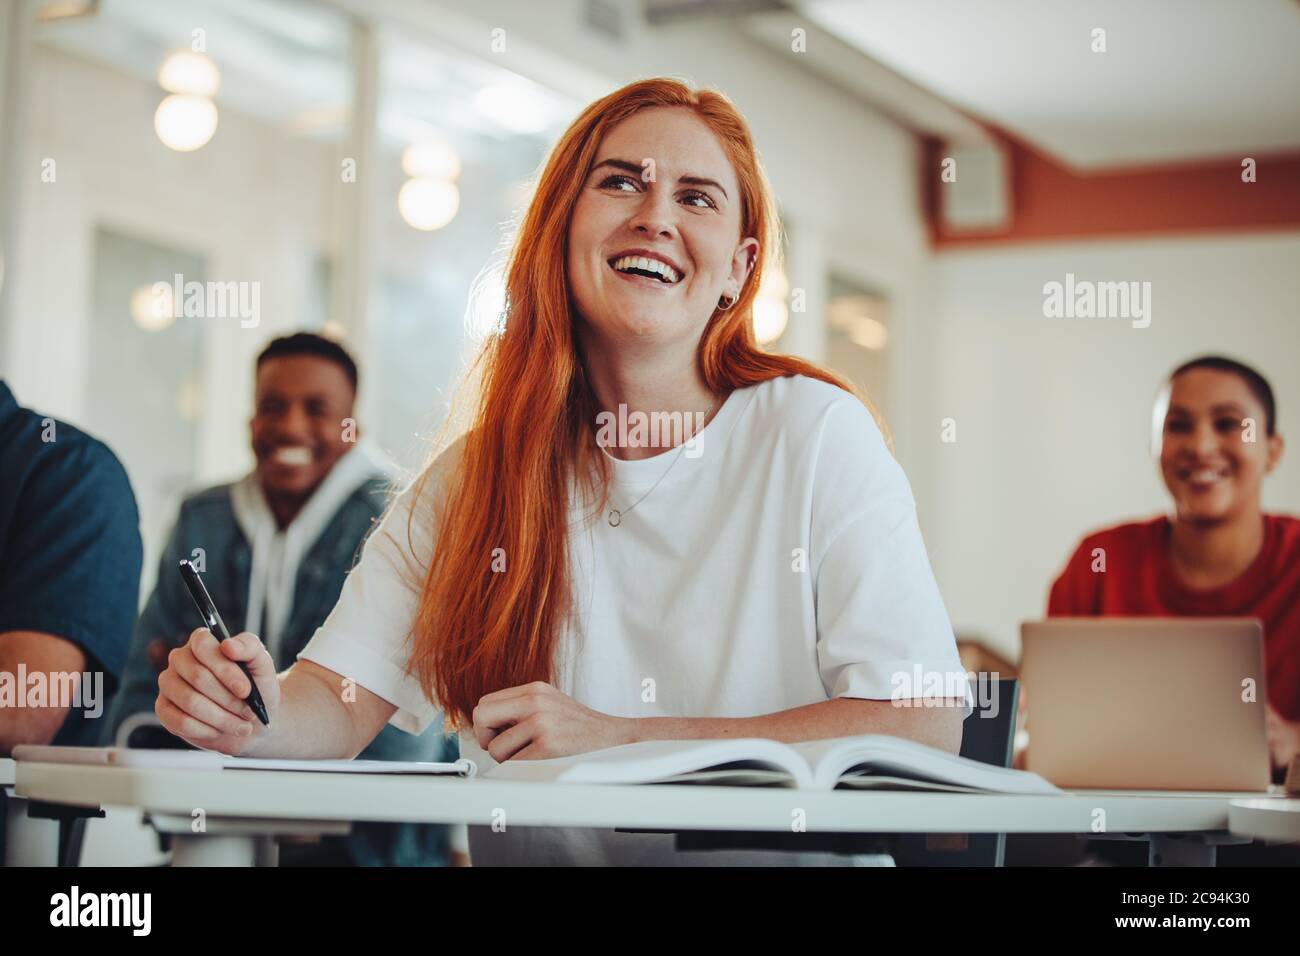 Woman paying attention in lecture. Female student listening to the teacher and smiling sitting in classroom. Stock Photo